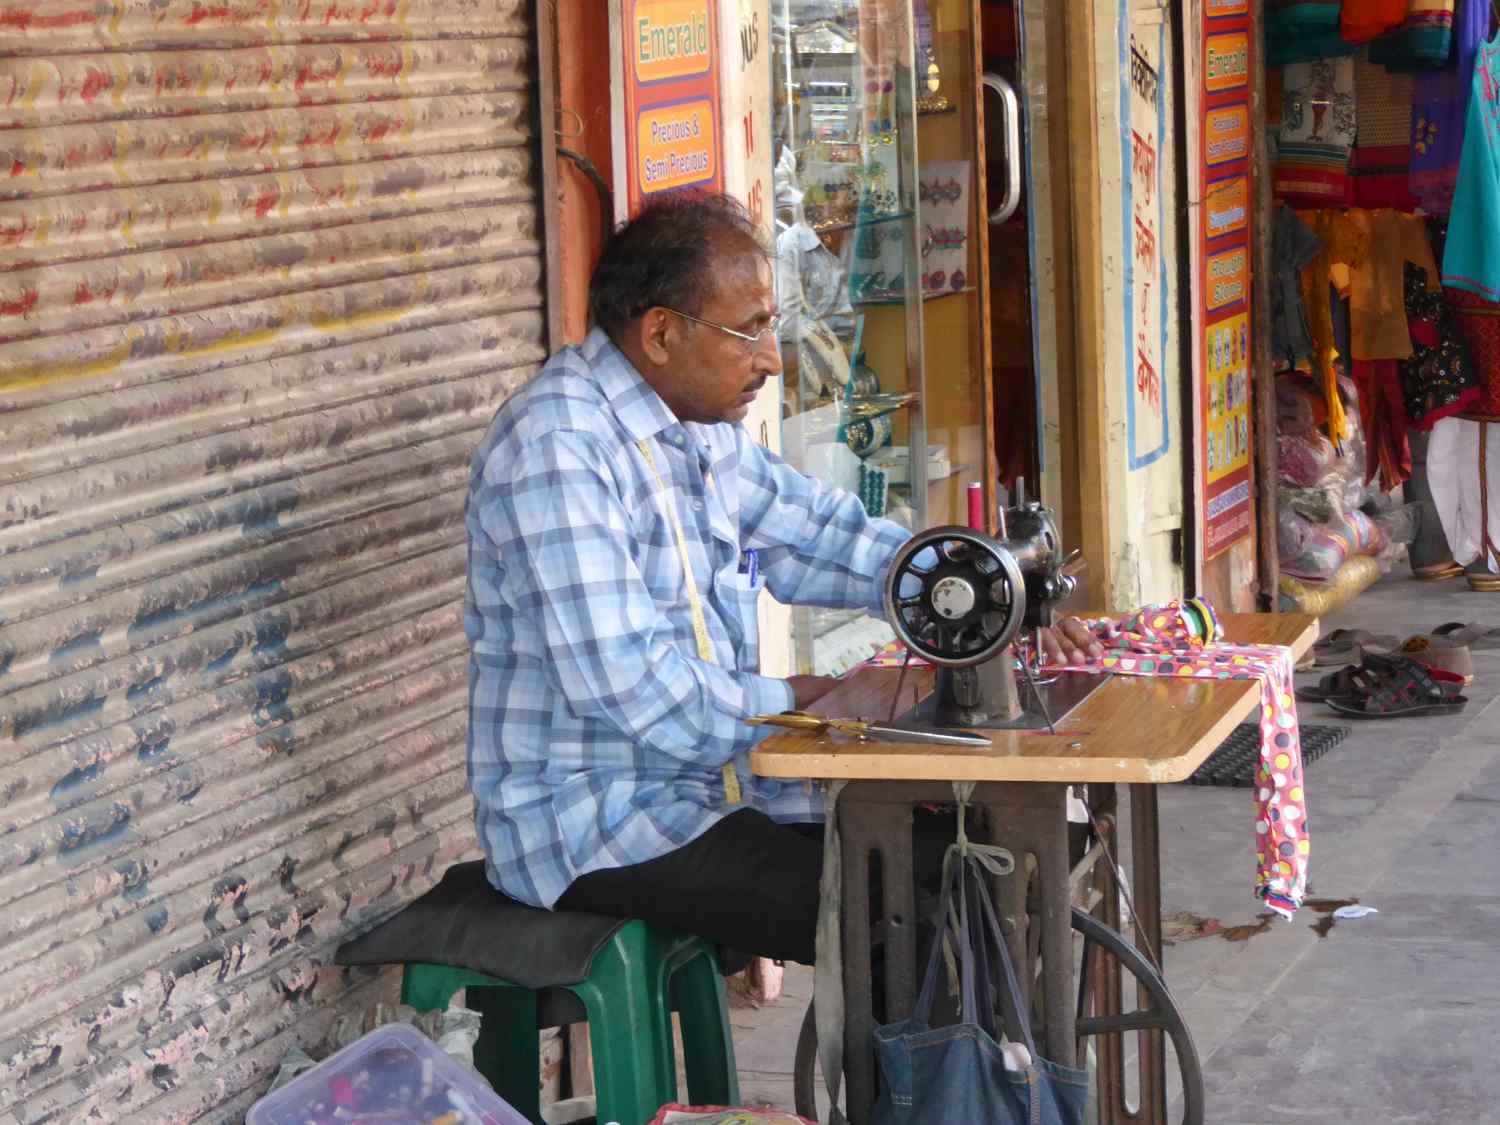 Tailor at work on the sidewalk